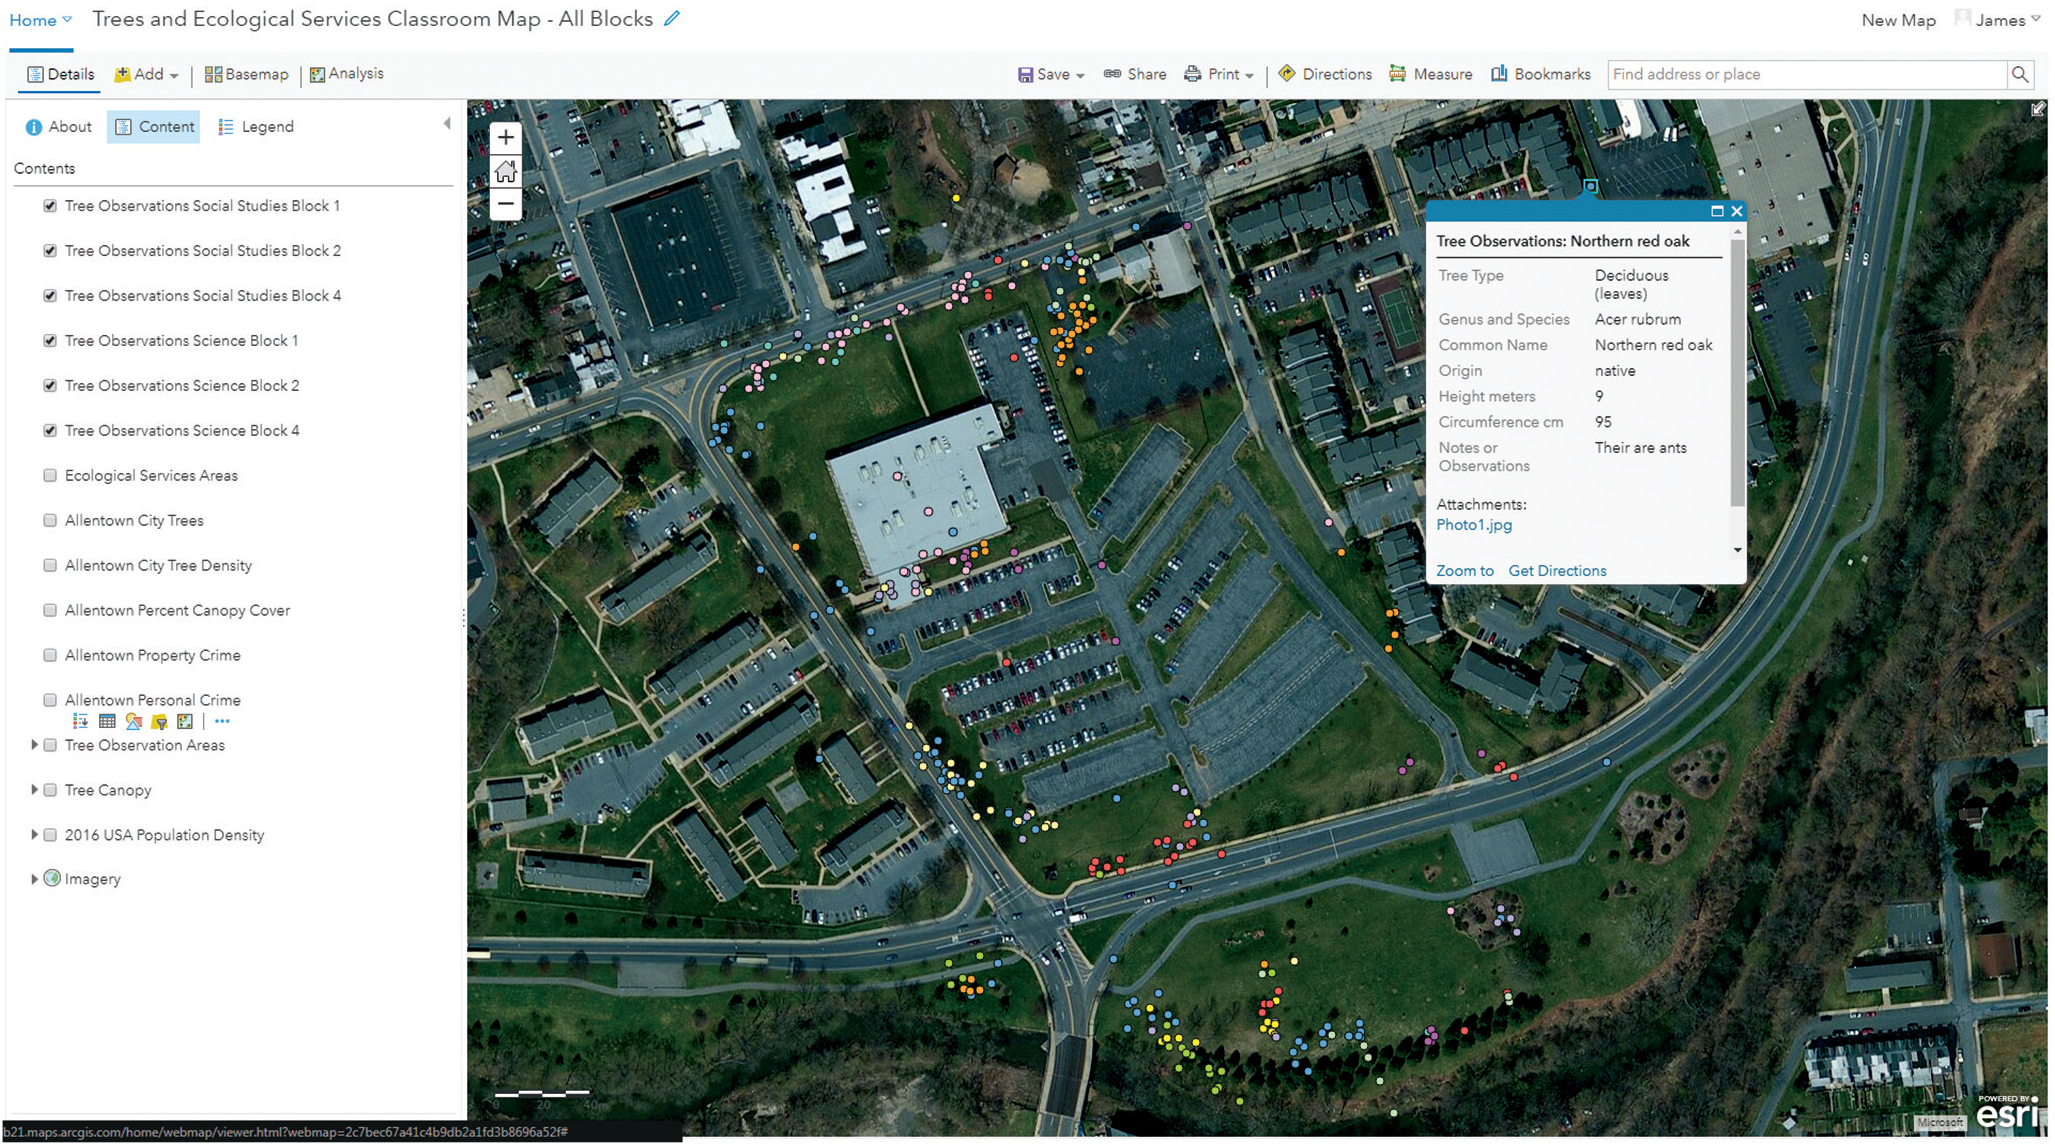 ArcGIS Online user interface showing student investigation areas and student tree identification data in the colored circles. 